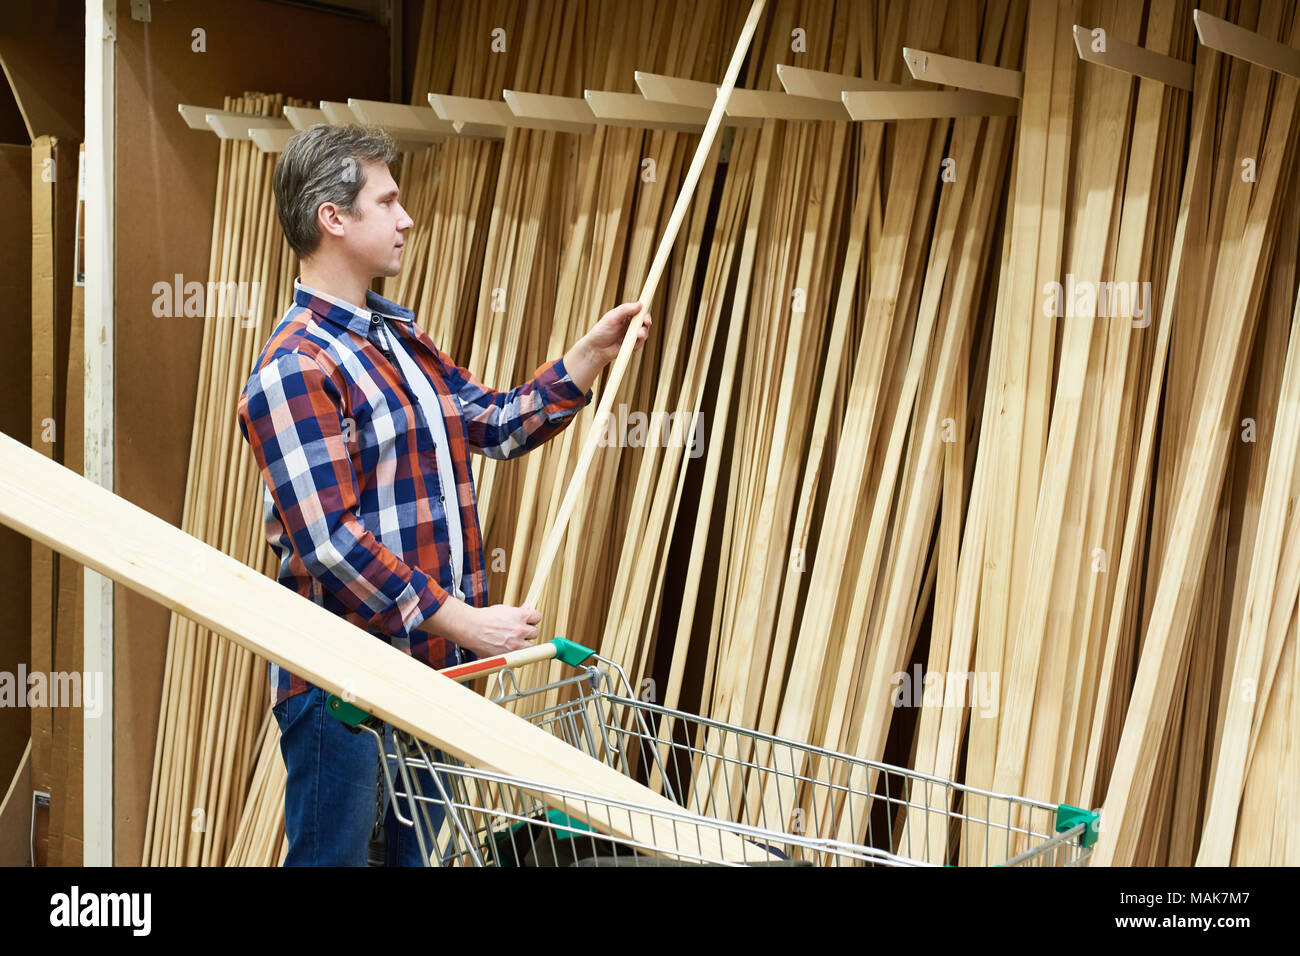 Man chooses and buys wooden boards in a construction supermarket Stock Photo